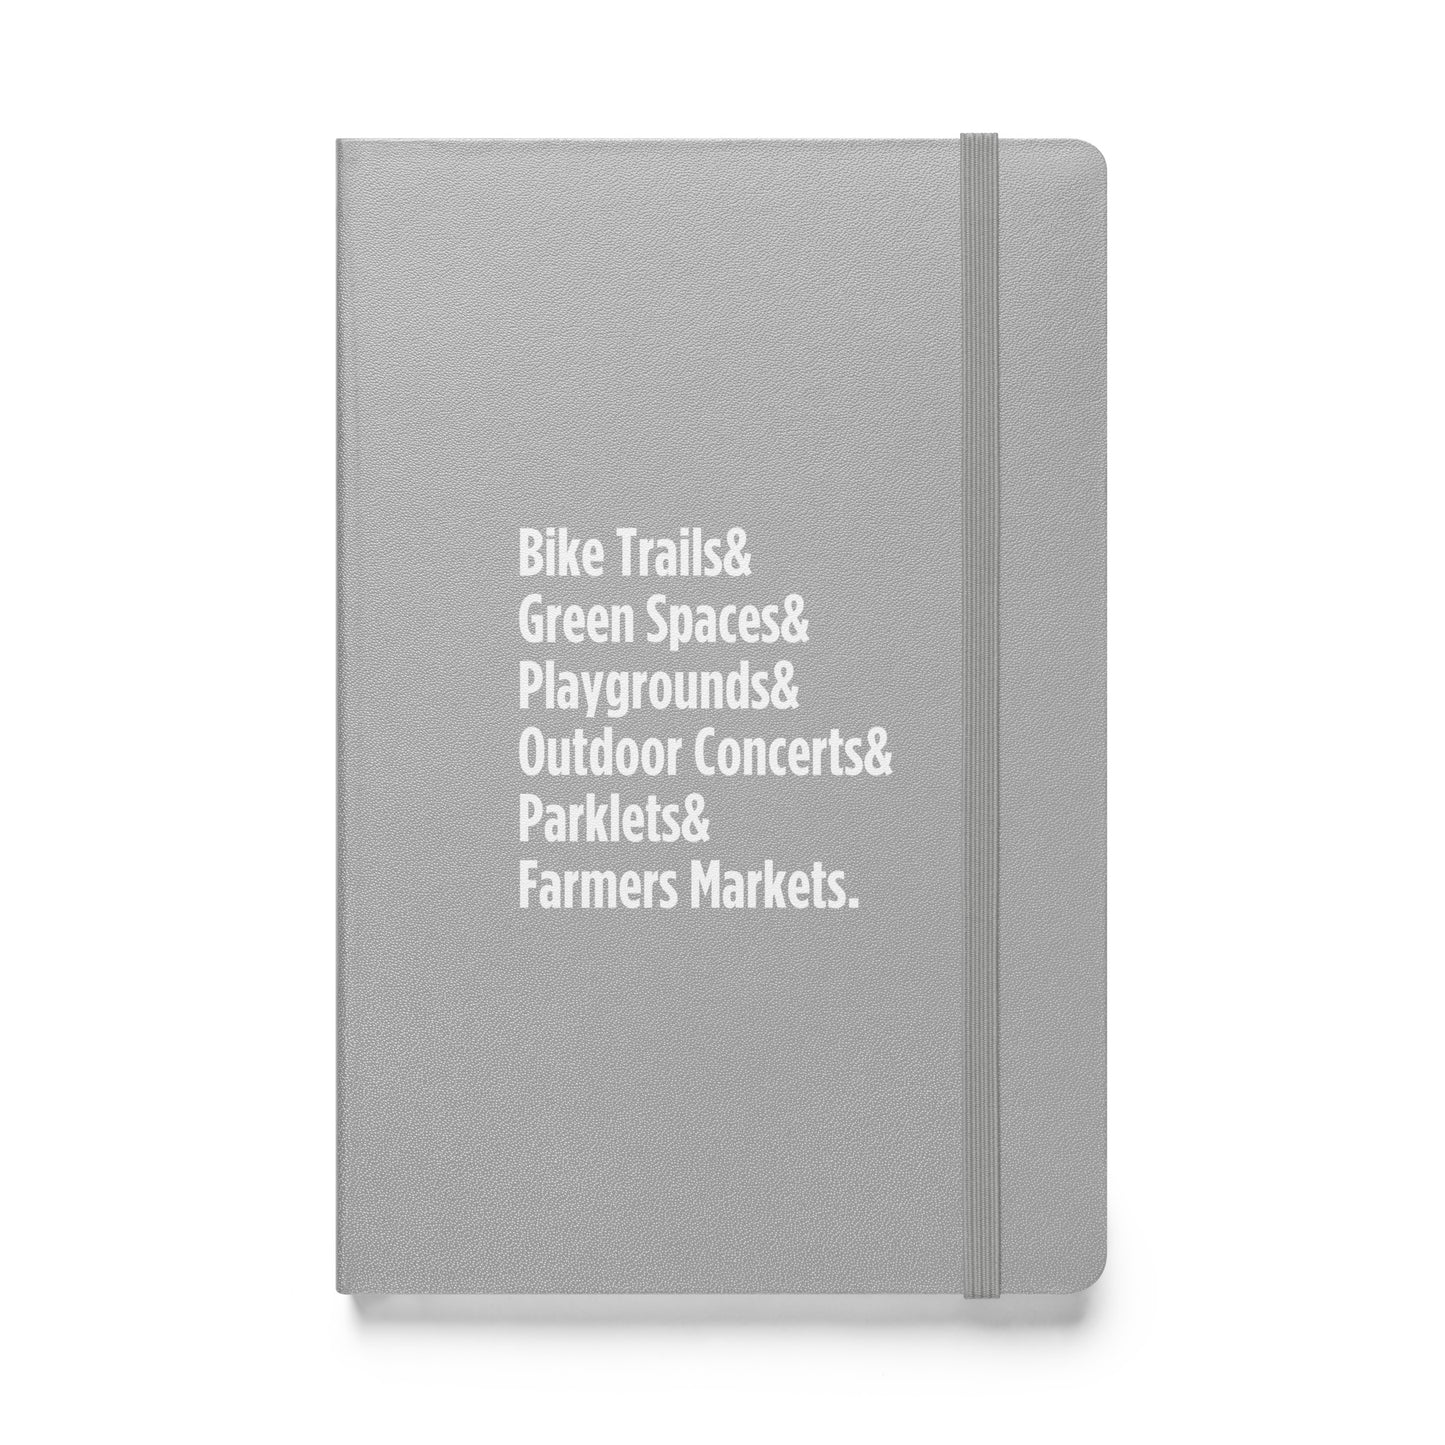 "Only on Main Street" (Greenspaces) Hardcover Bound Notebook